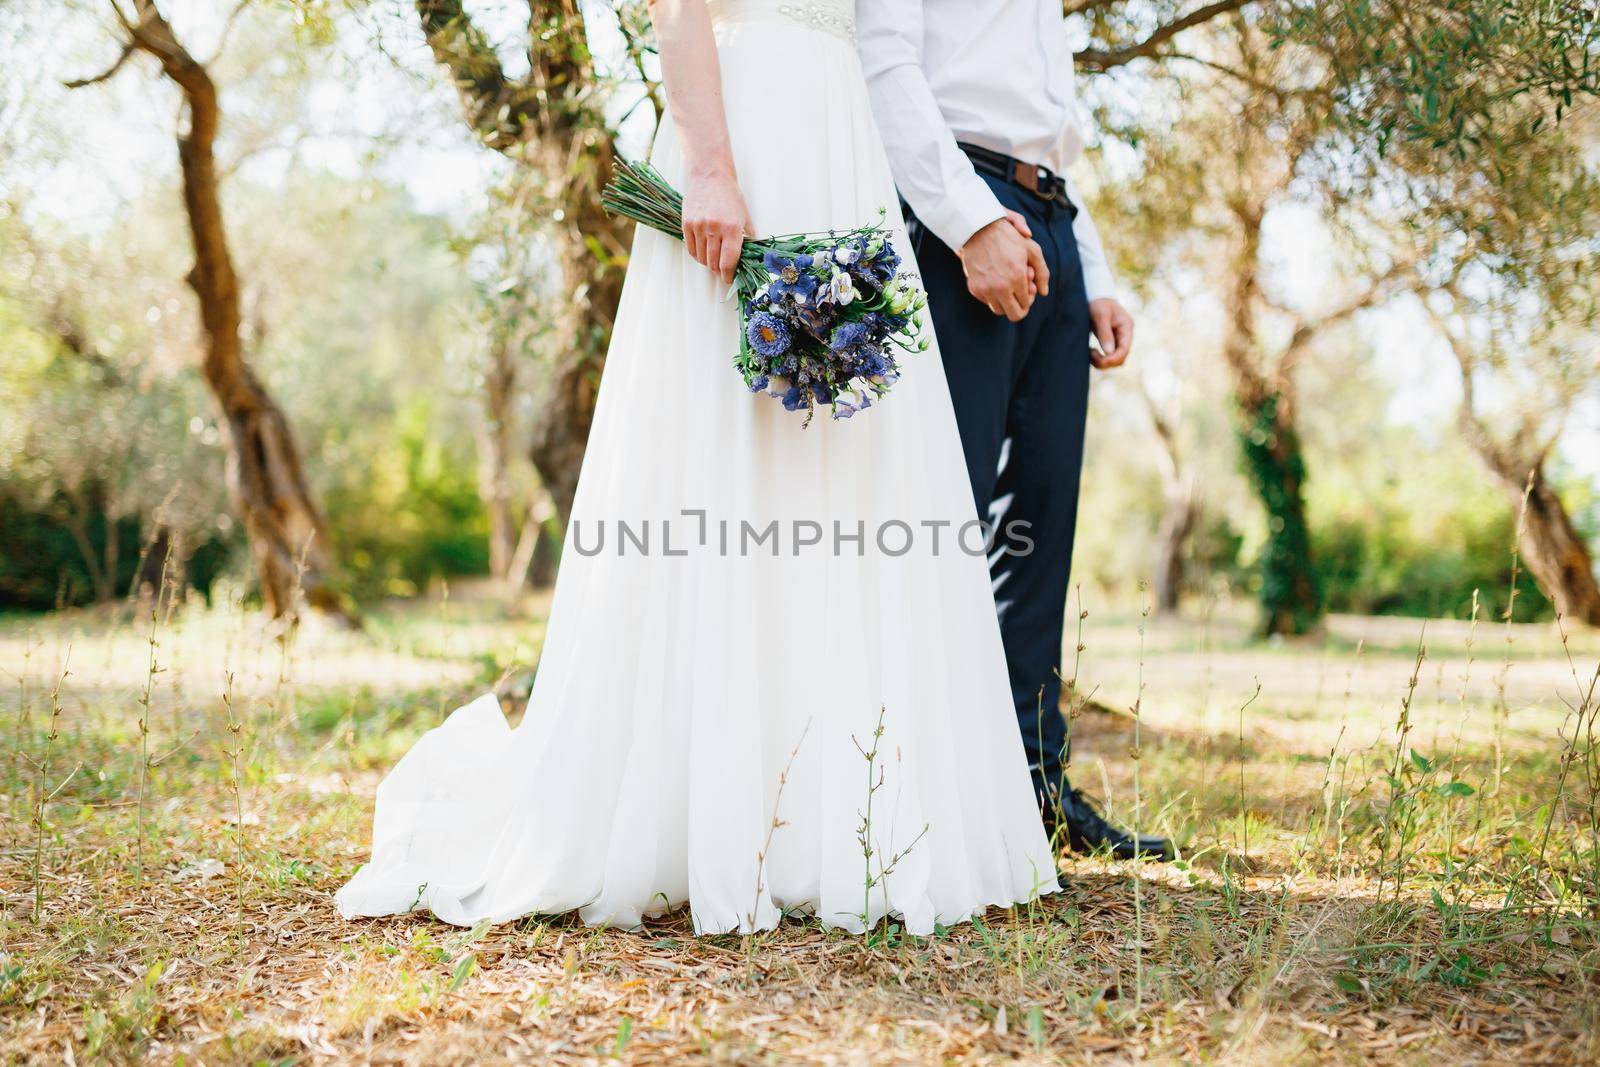 Bride with a bouquet of blue flowers and the groom stand side by side in the olive grove and hold hands by Nadtochiy